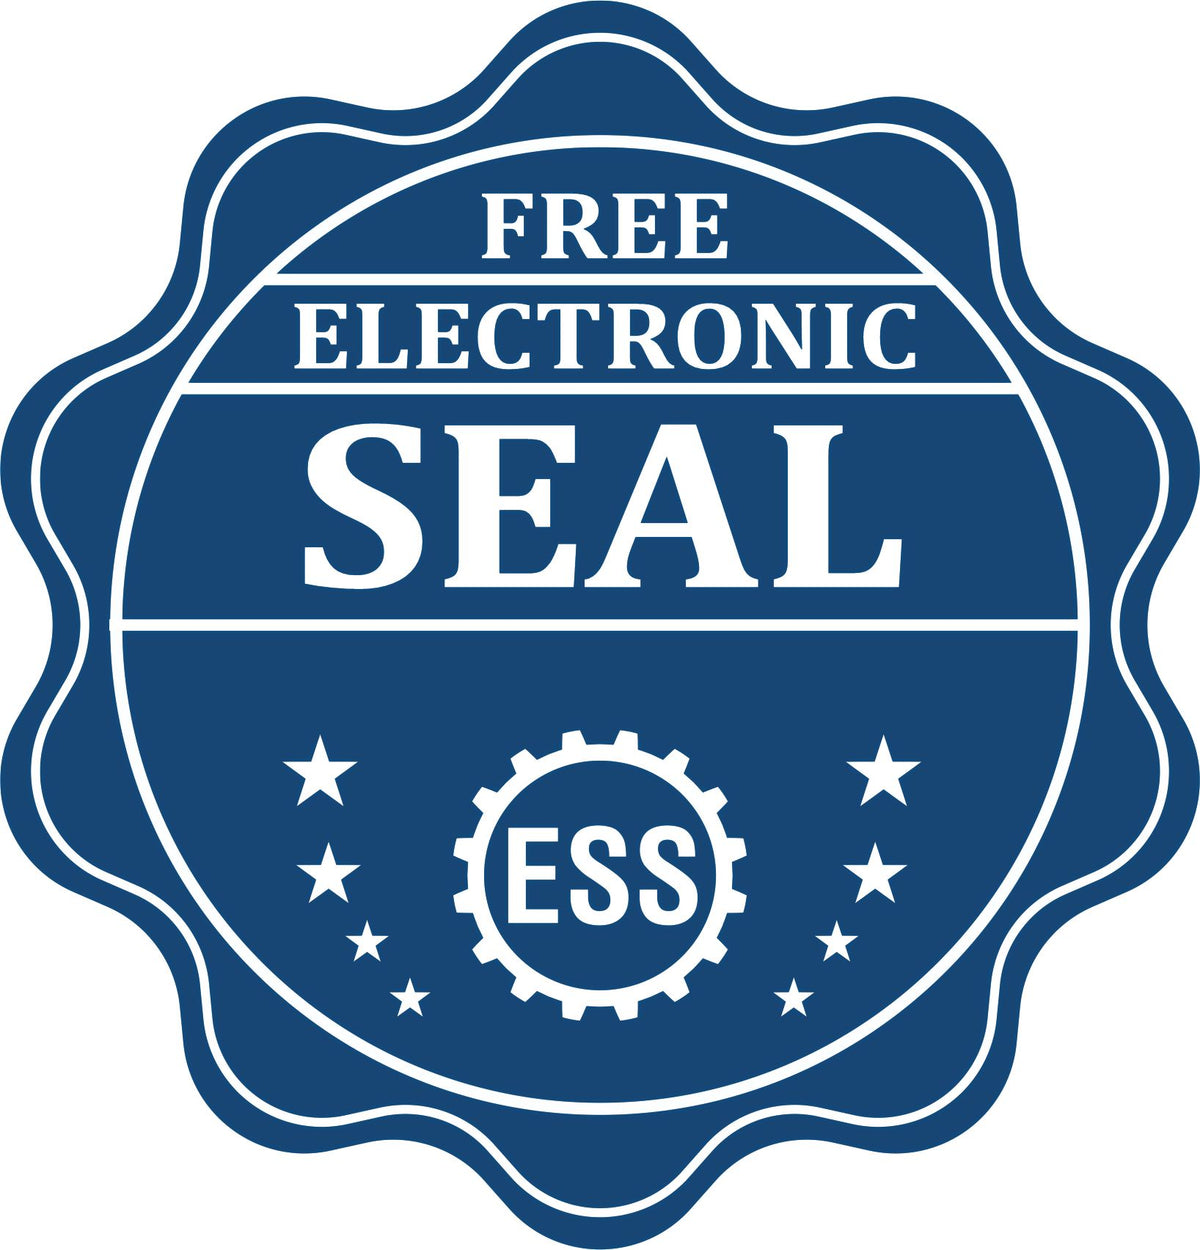 A badge showing a free electronic seal for the Slim Pre-Inked Florida Professional Engineer Seal Stamp with stars and the ESS gear on the emblem.